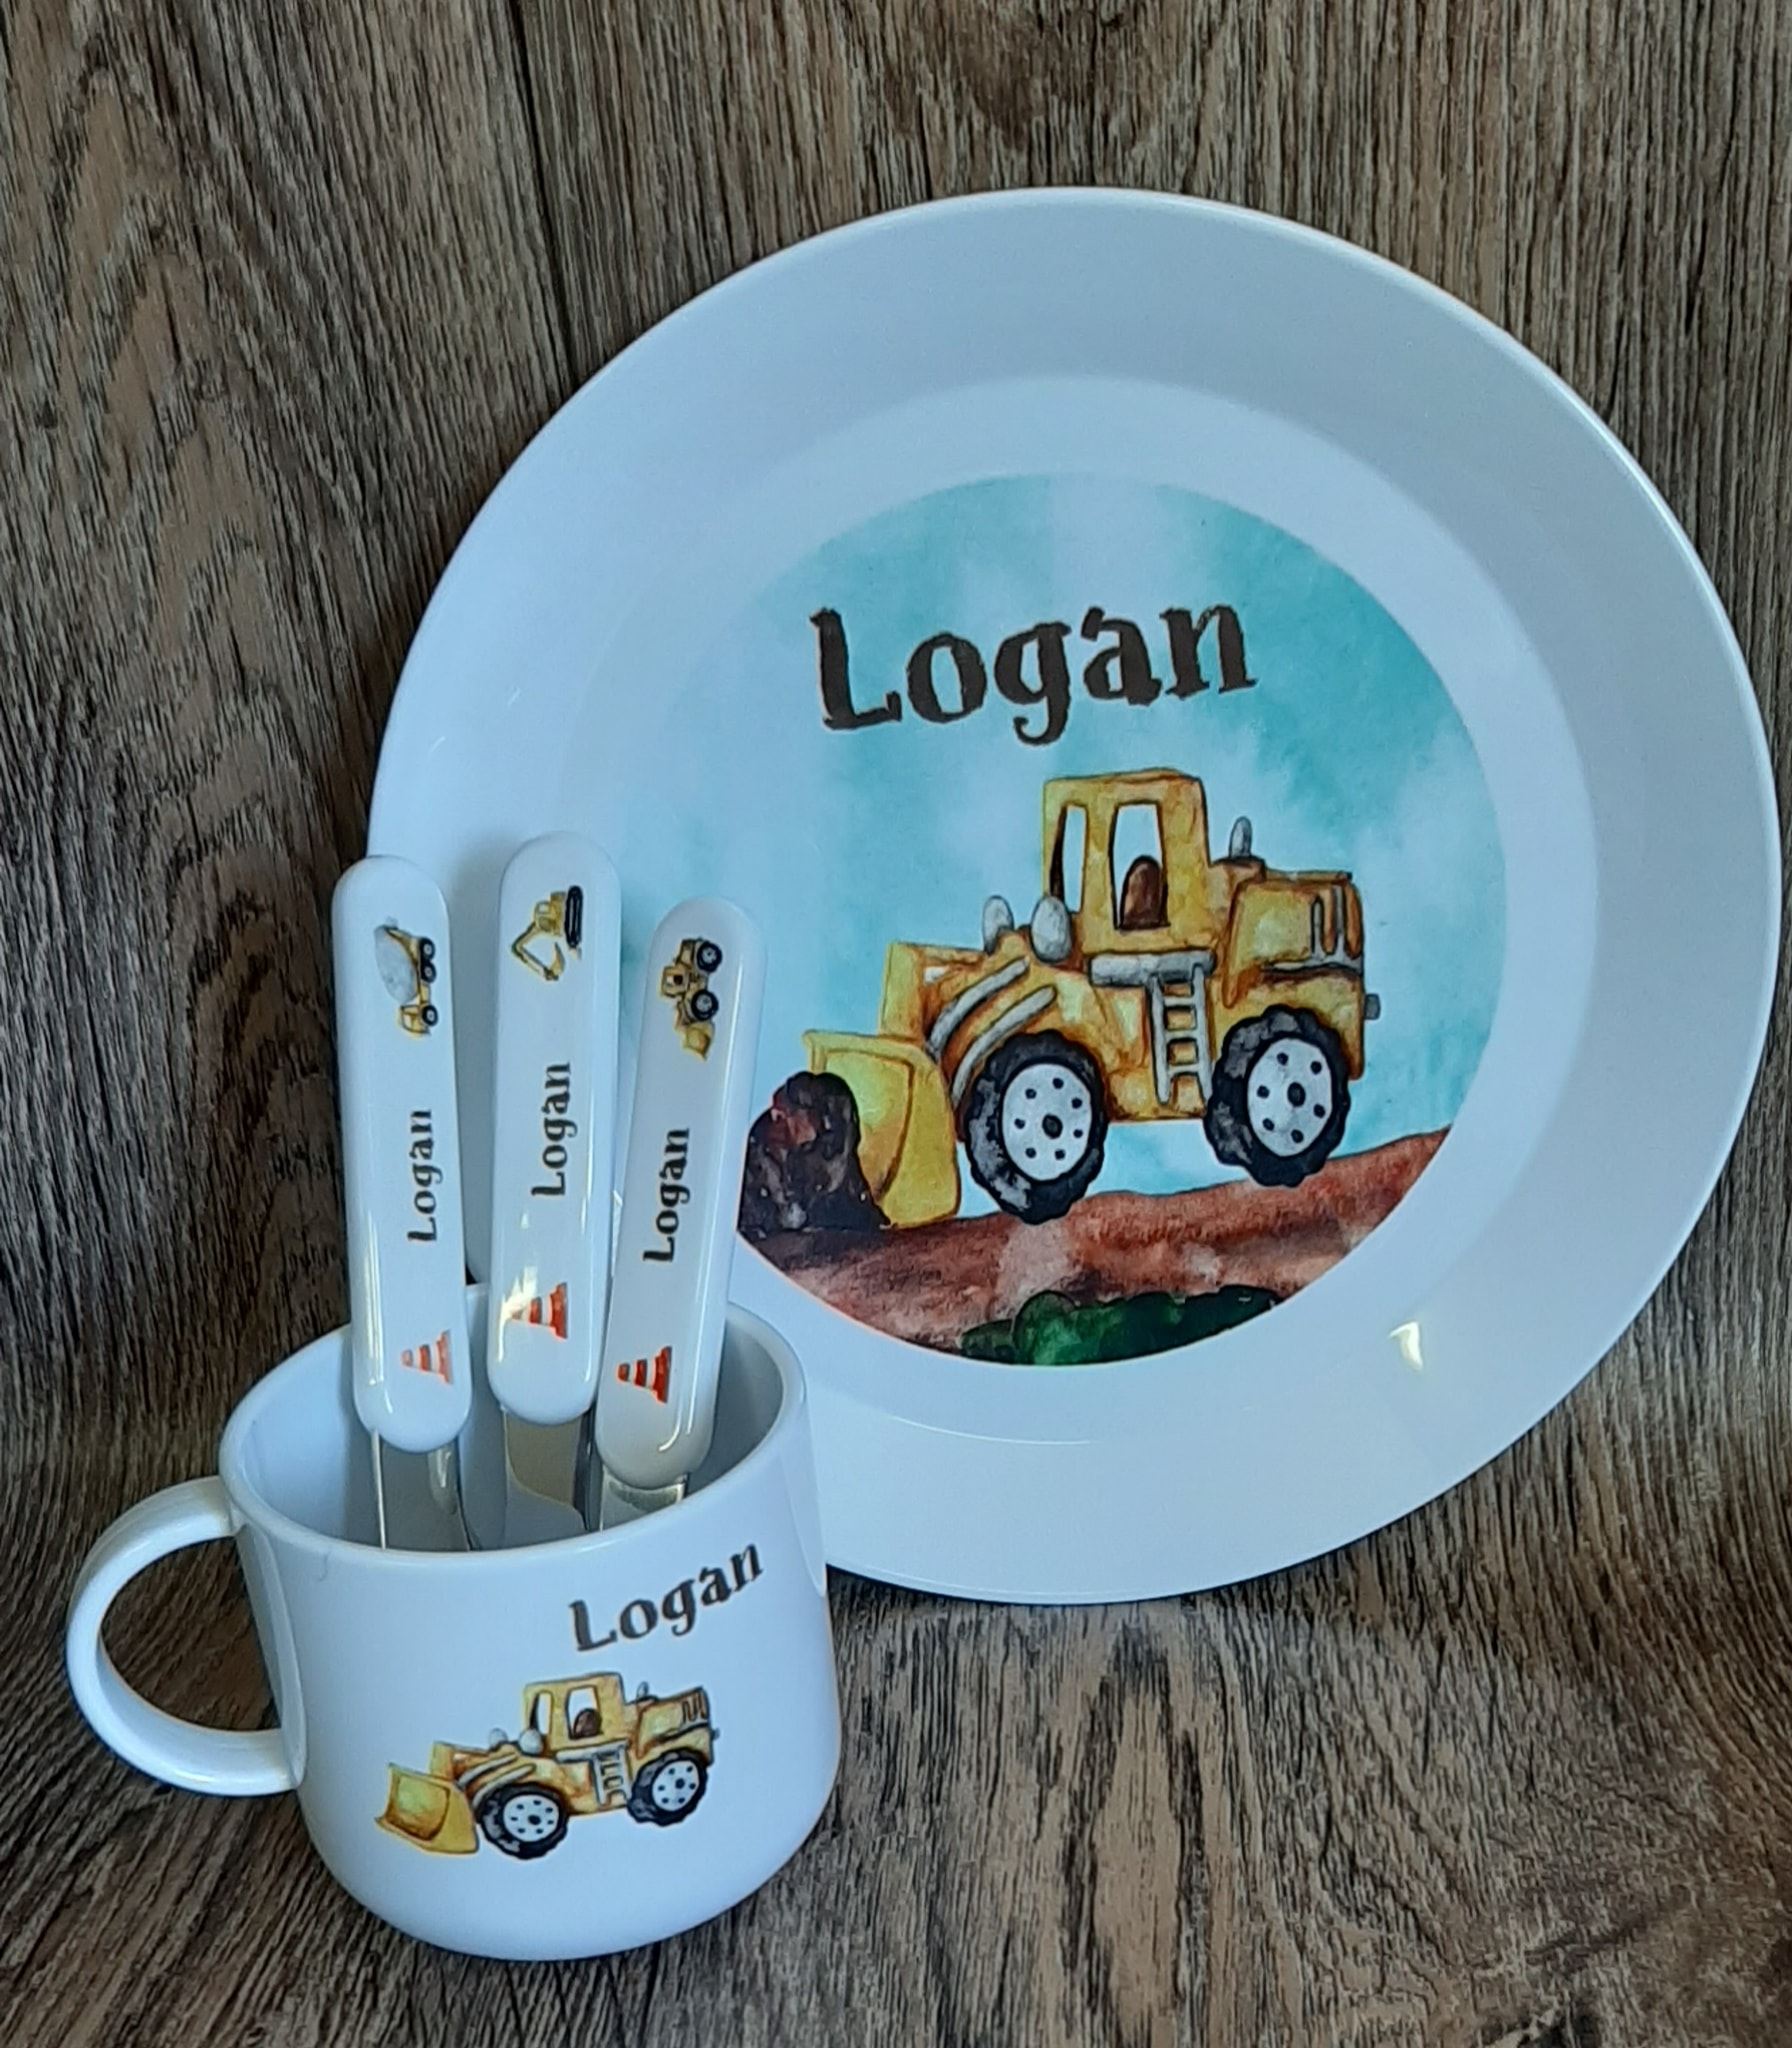 Children's Plastic Dinner Set with personalised plastic cutlery, plate and mini mug with diggers